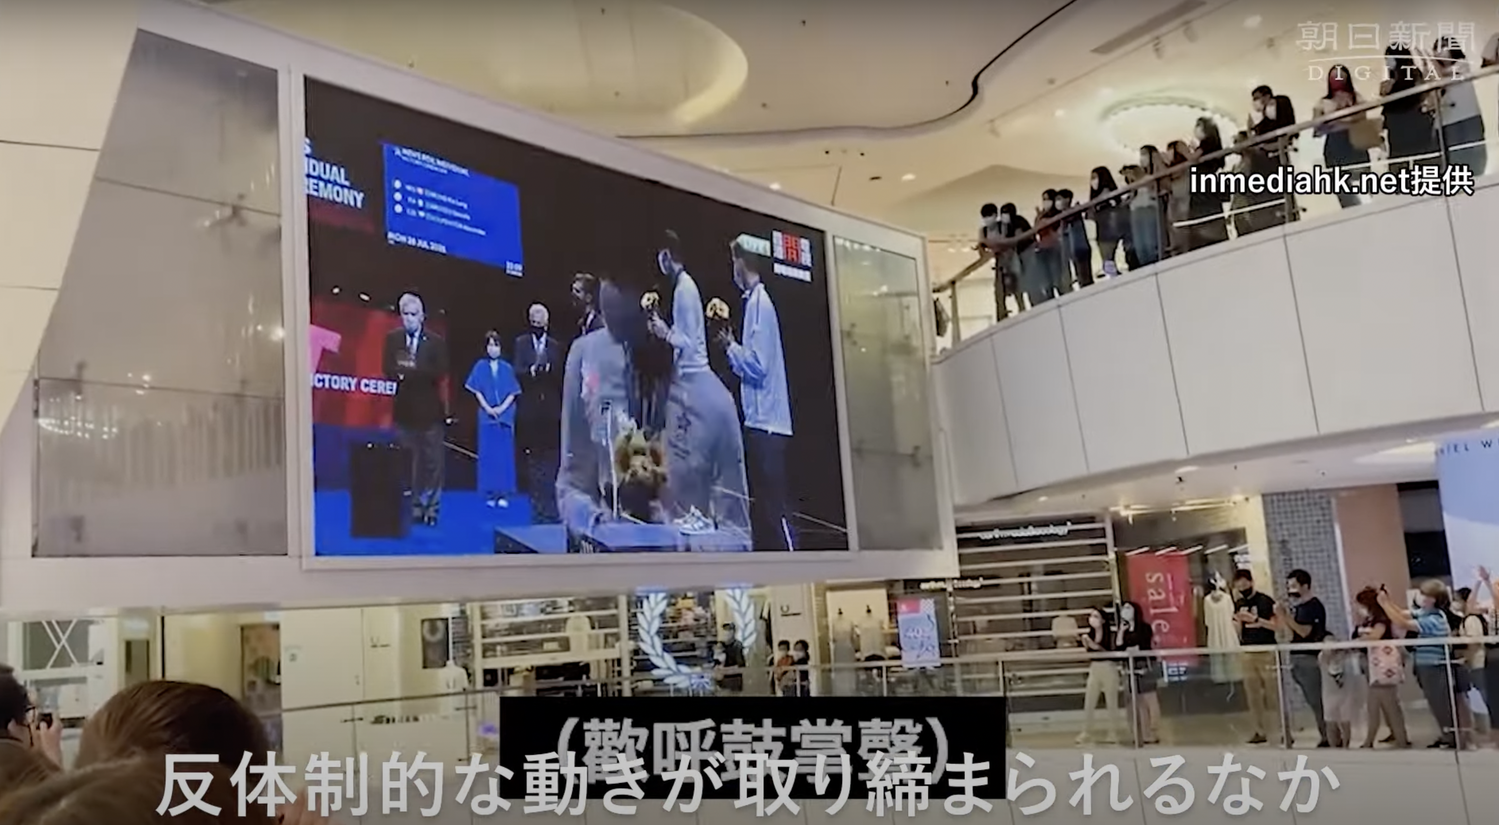 Hong Kong crowd boos China national anthem olympic medal ceremony mall